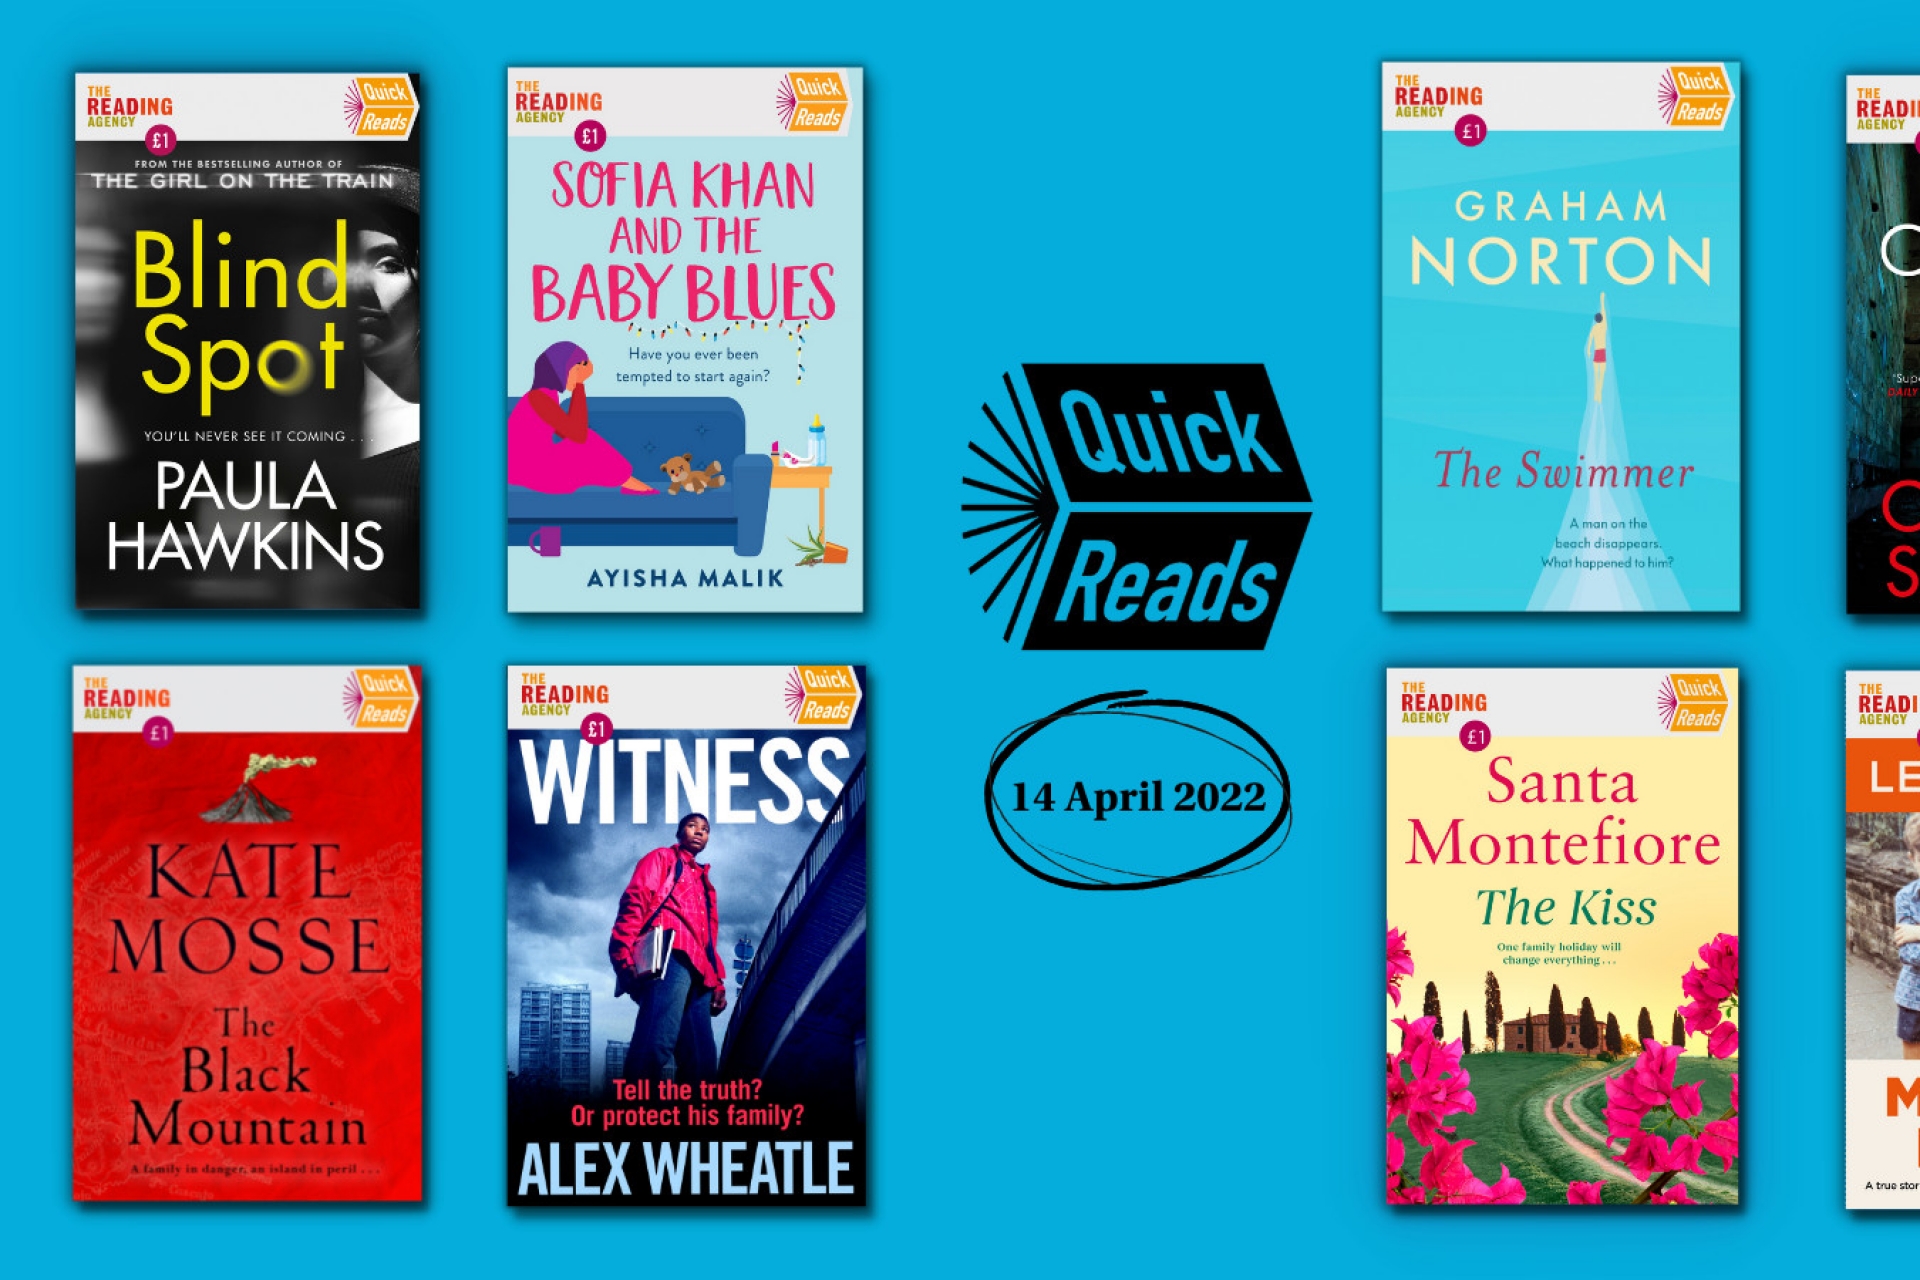 The Reading Agency reveals the 2022 Quick Reads covers